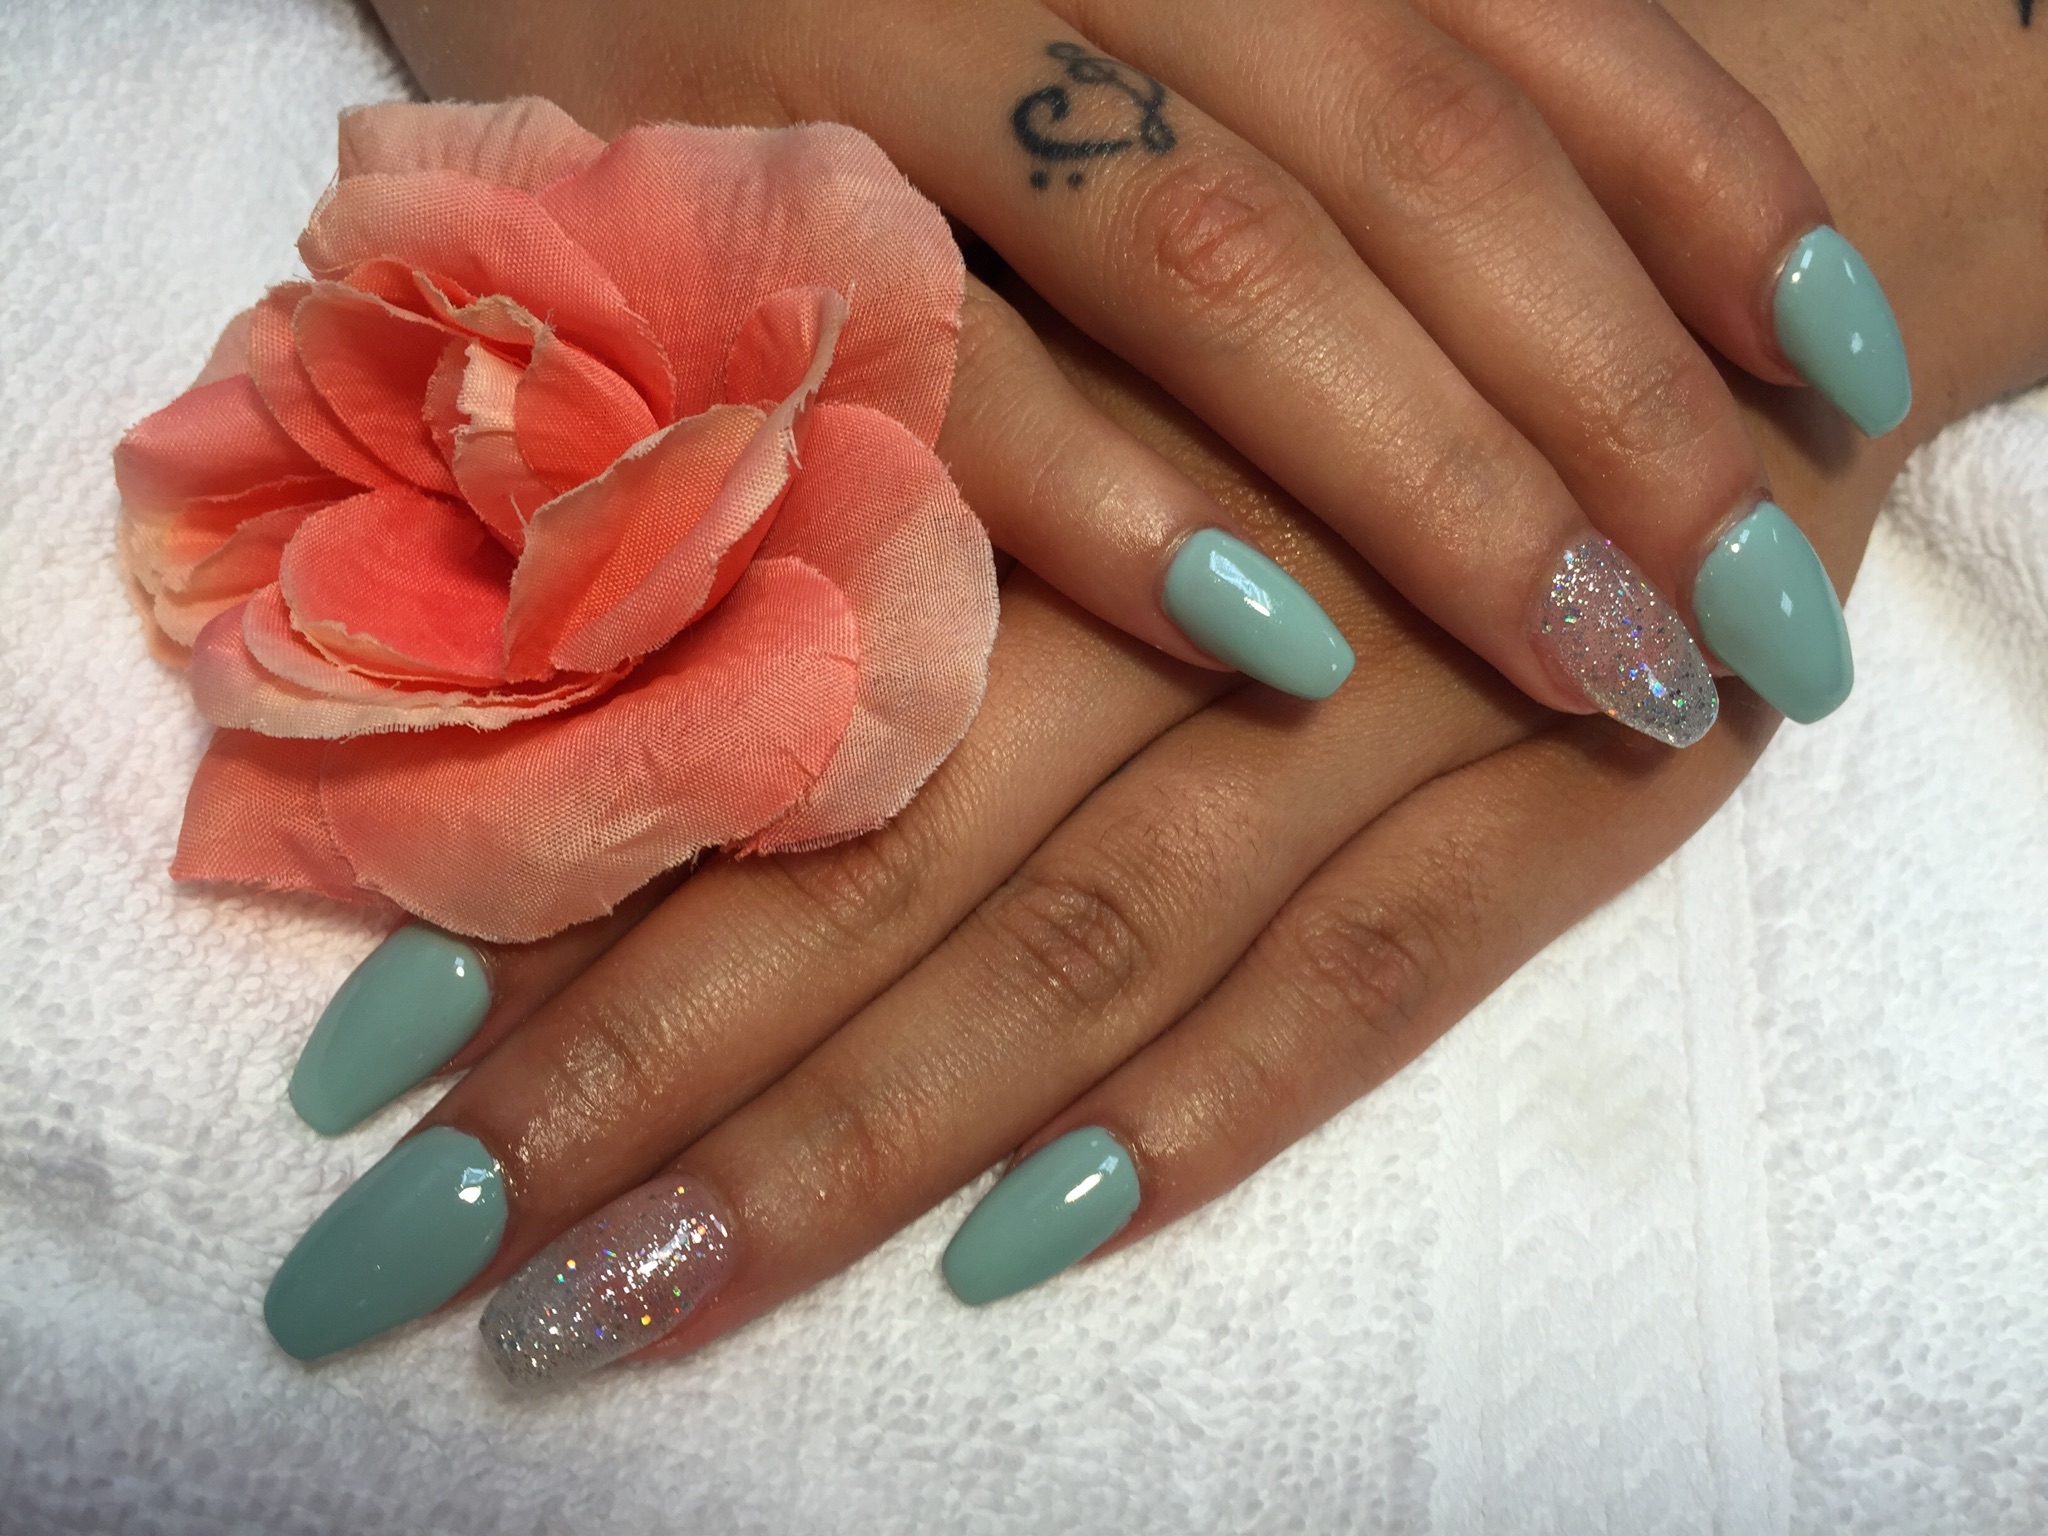 Nails And Spa Near Me - NailsTip